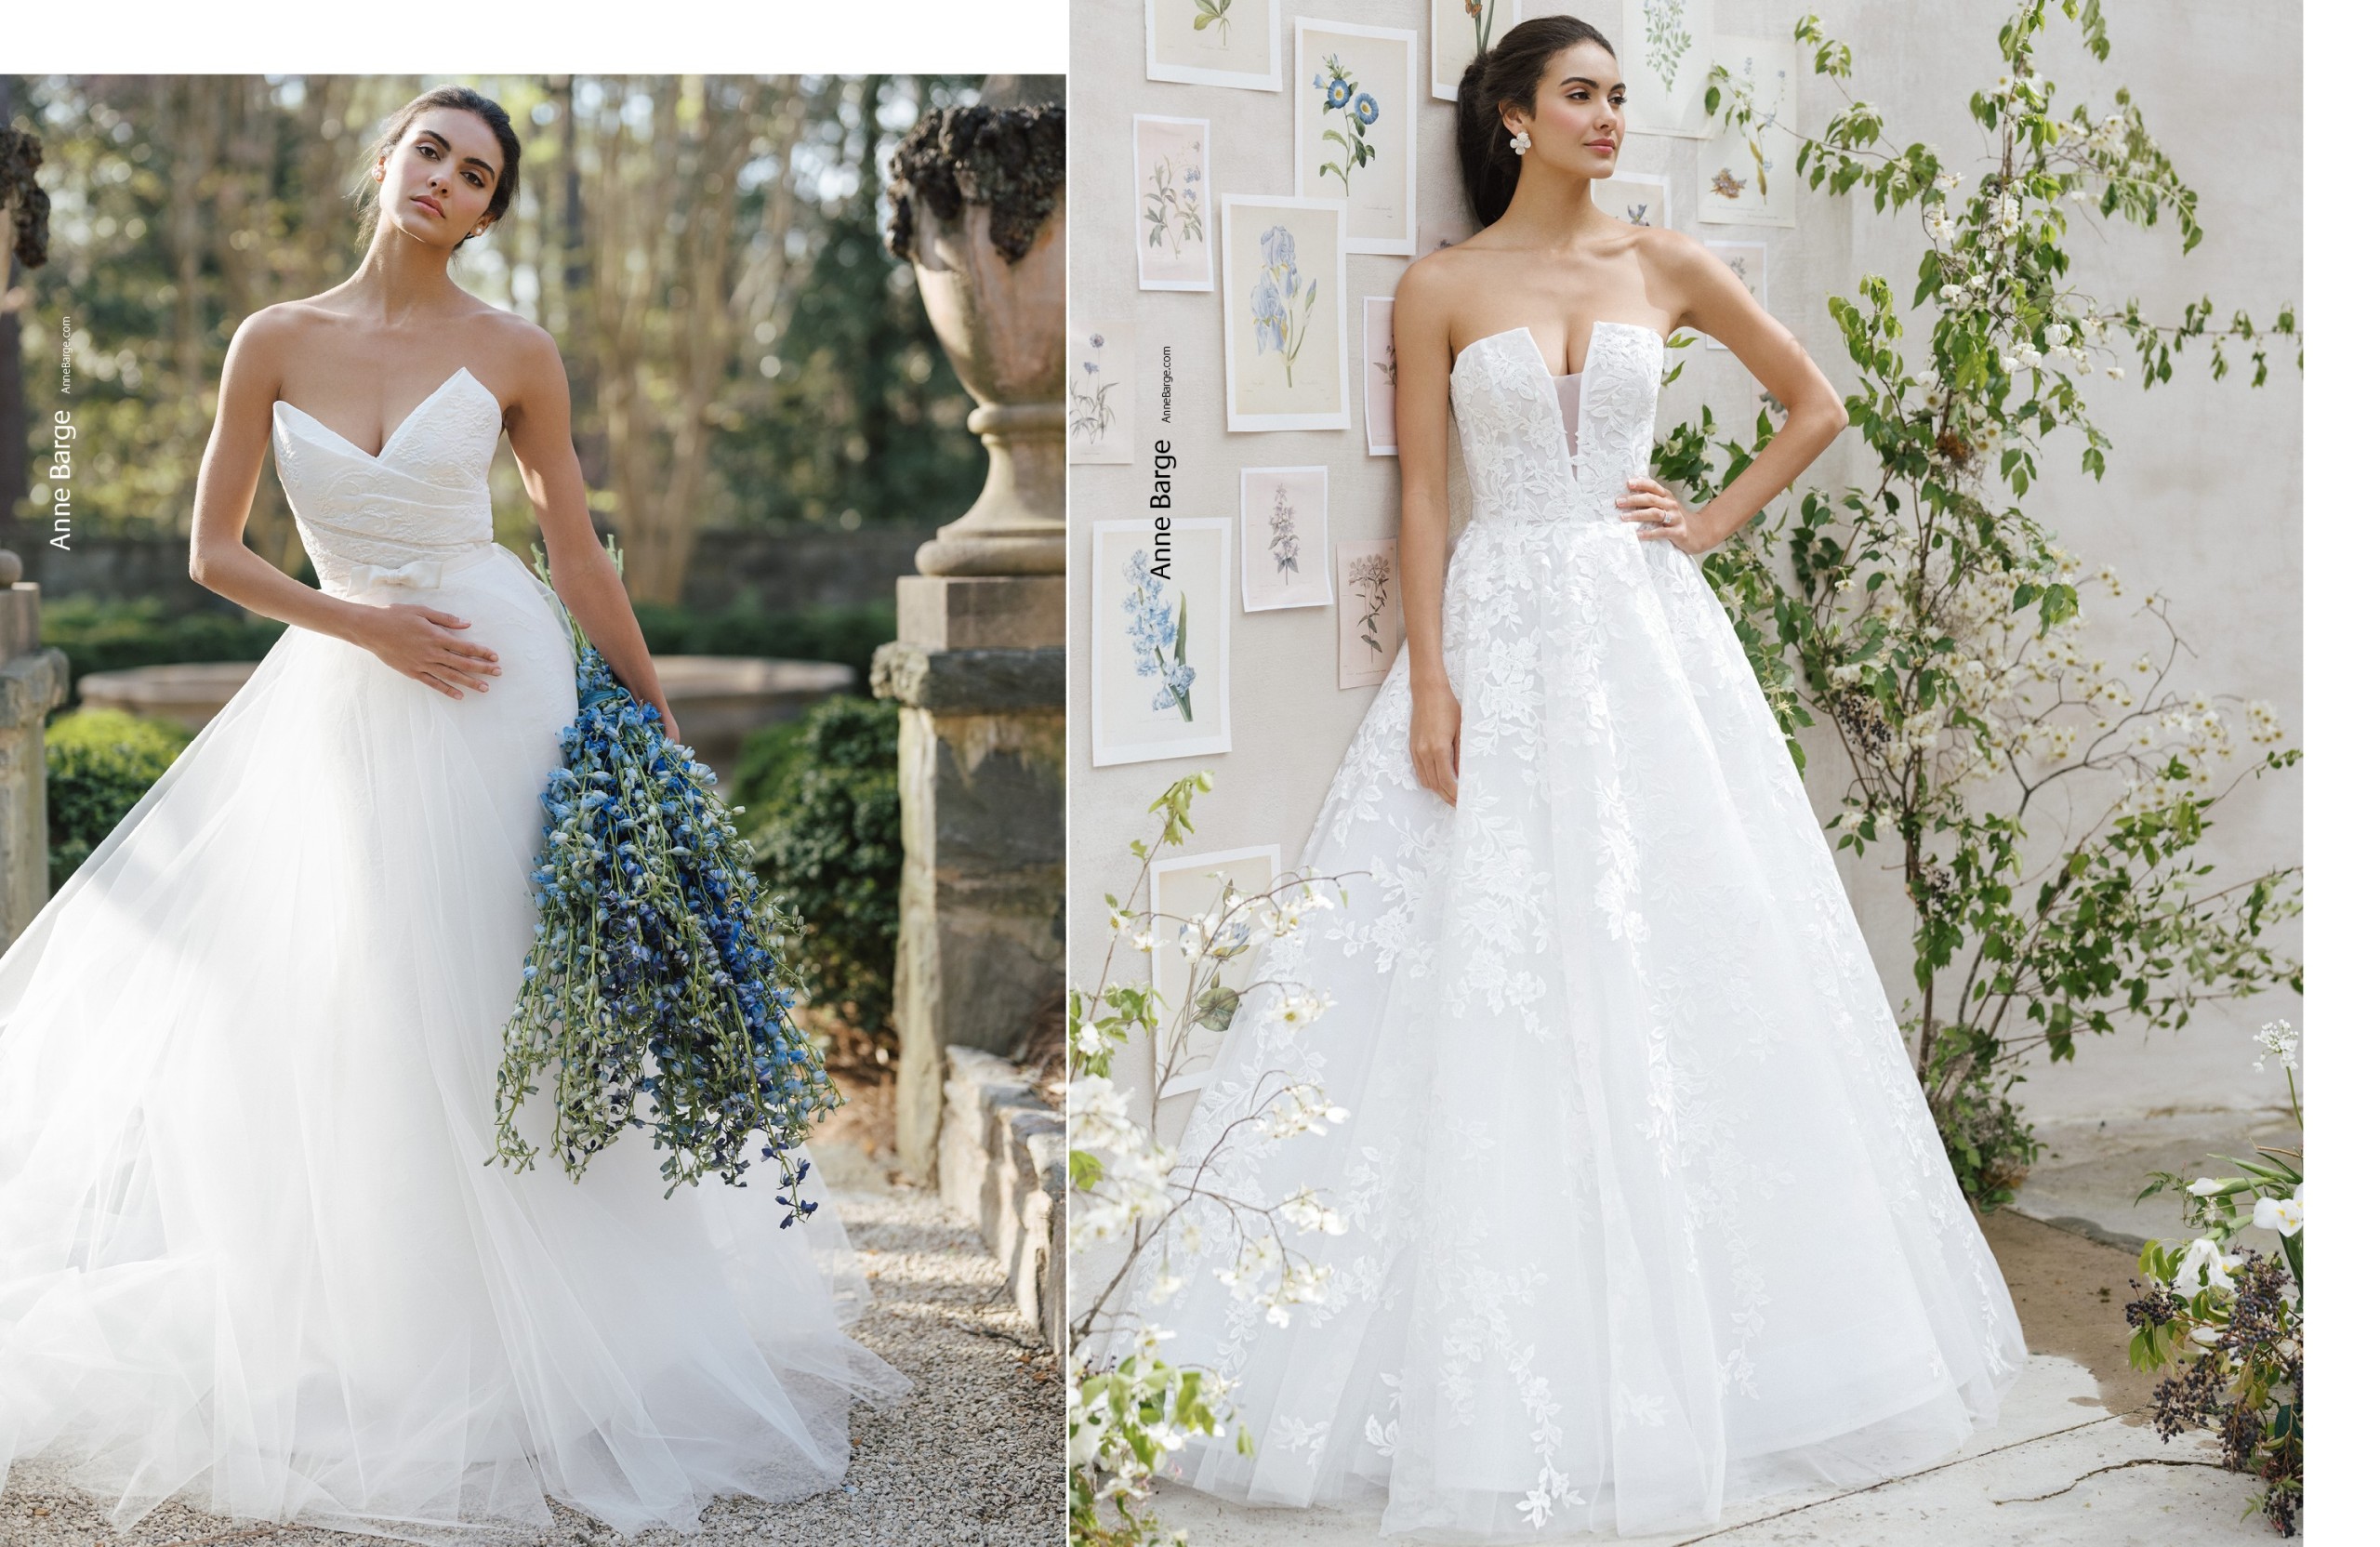 Dreams Come True So Dress Your Love Story. We Invite You To Discover Your  Dream Dress. Your Best Day Ever Awaits. Book Your In-Store Appointment at  Debbie's Bridal Text Us 213-614-0740 A